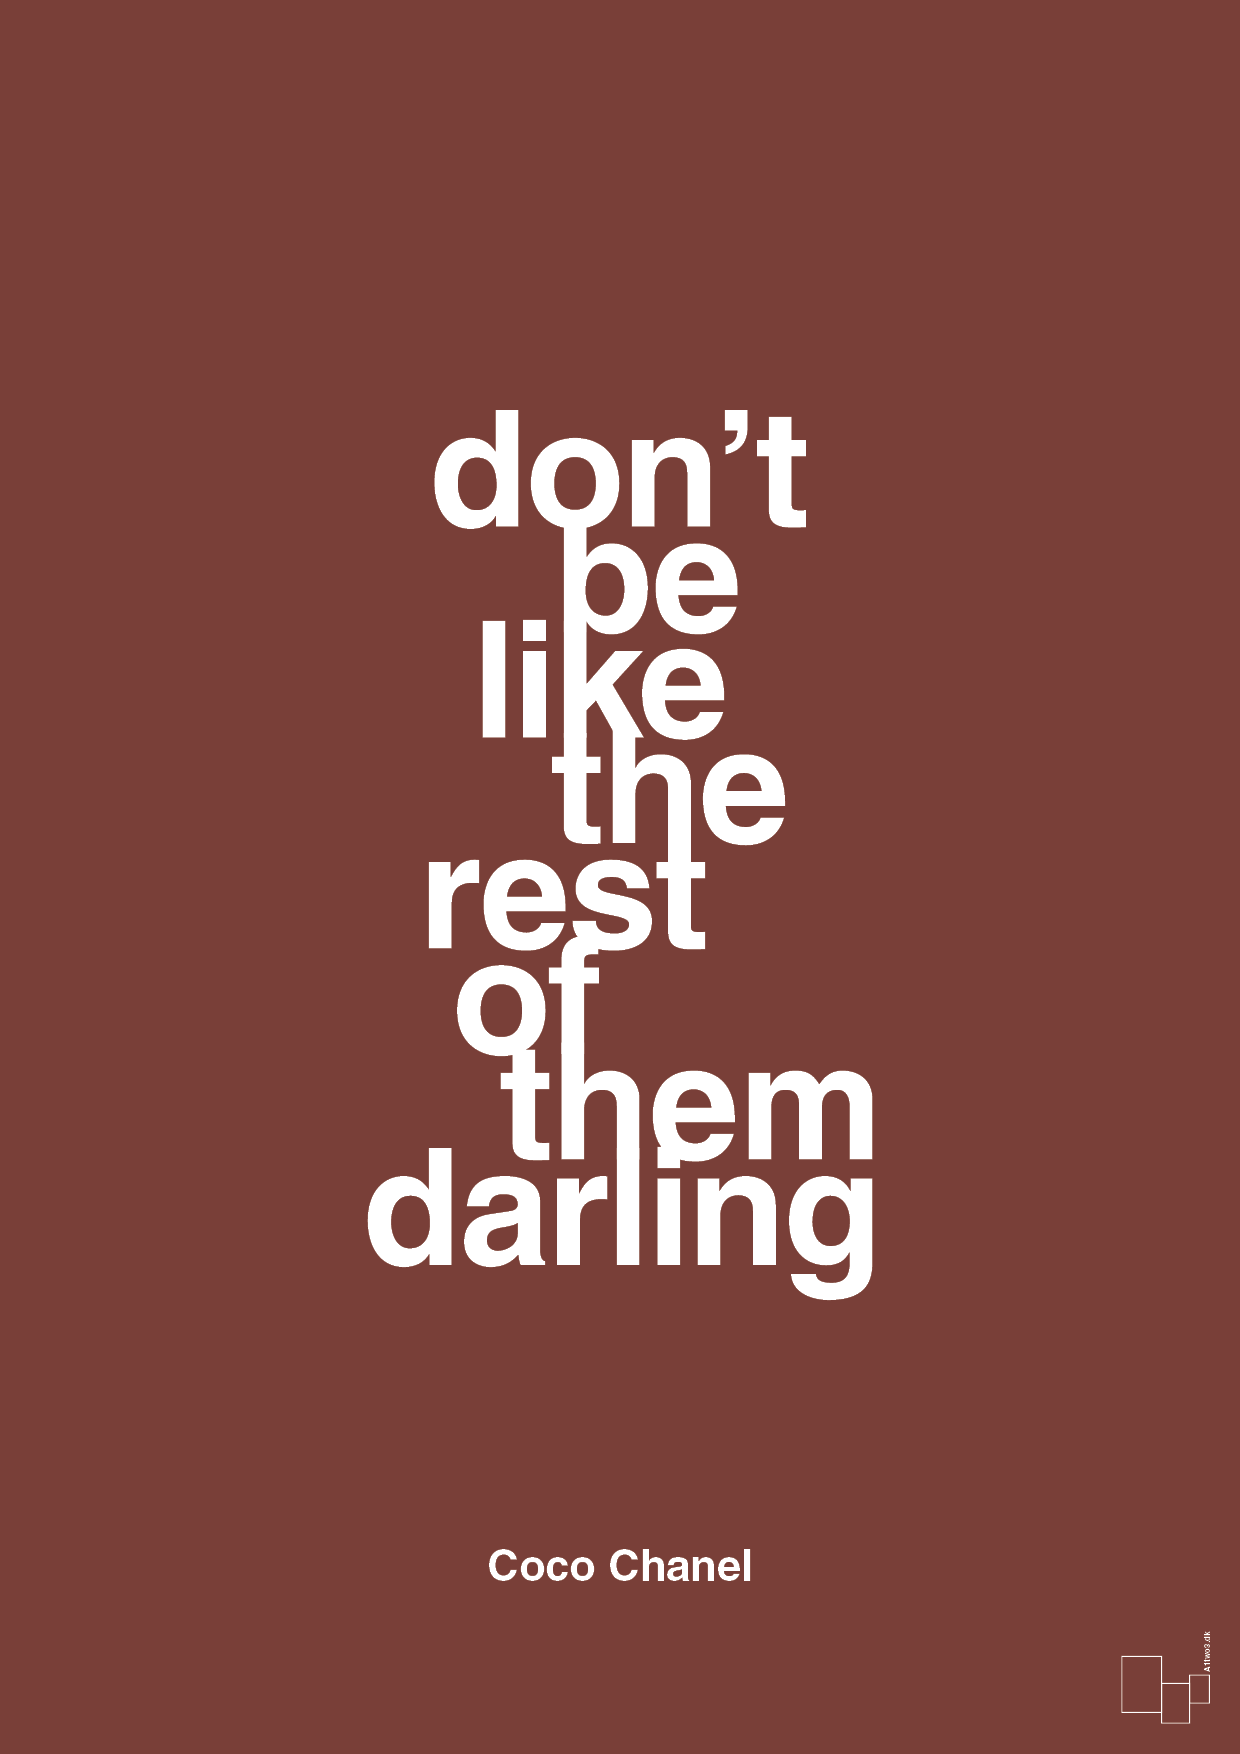 don’t be like the rest of them darling - Plakat med Citater i Red Pepper